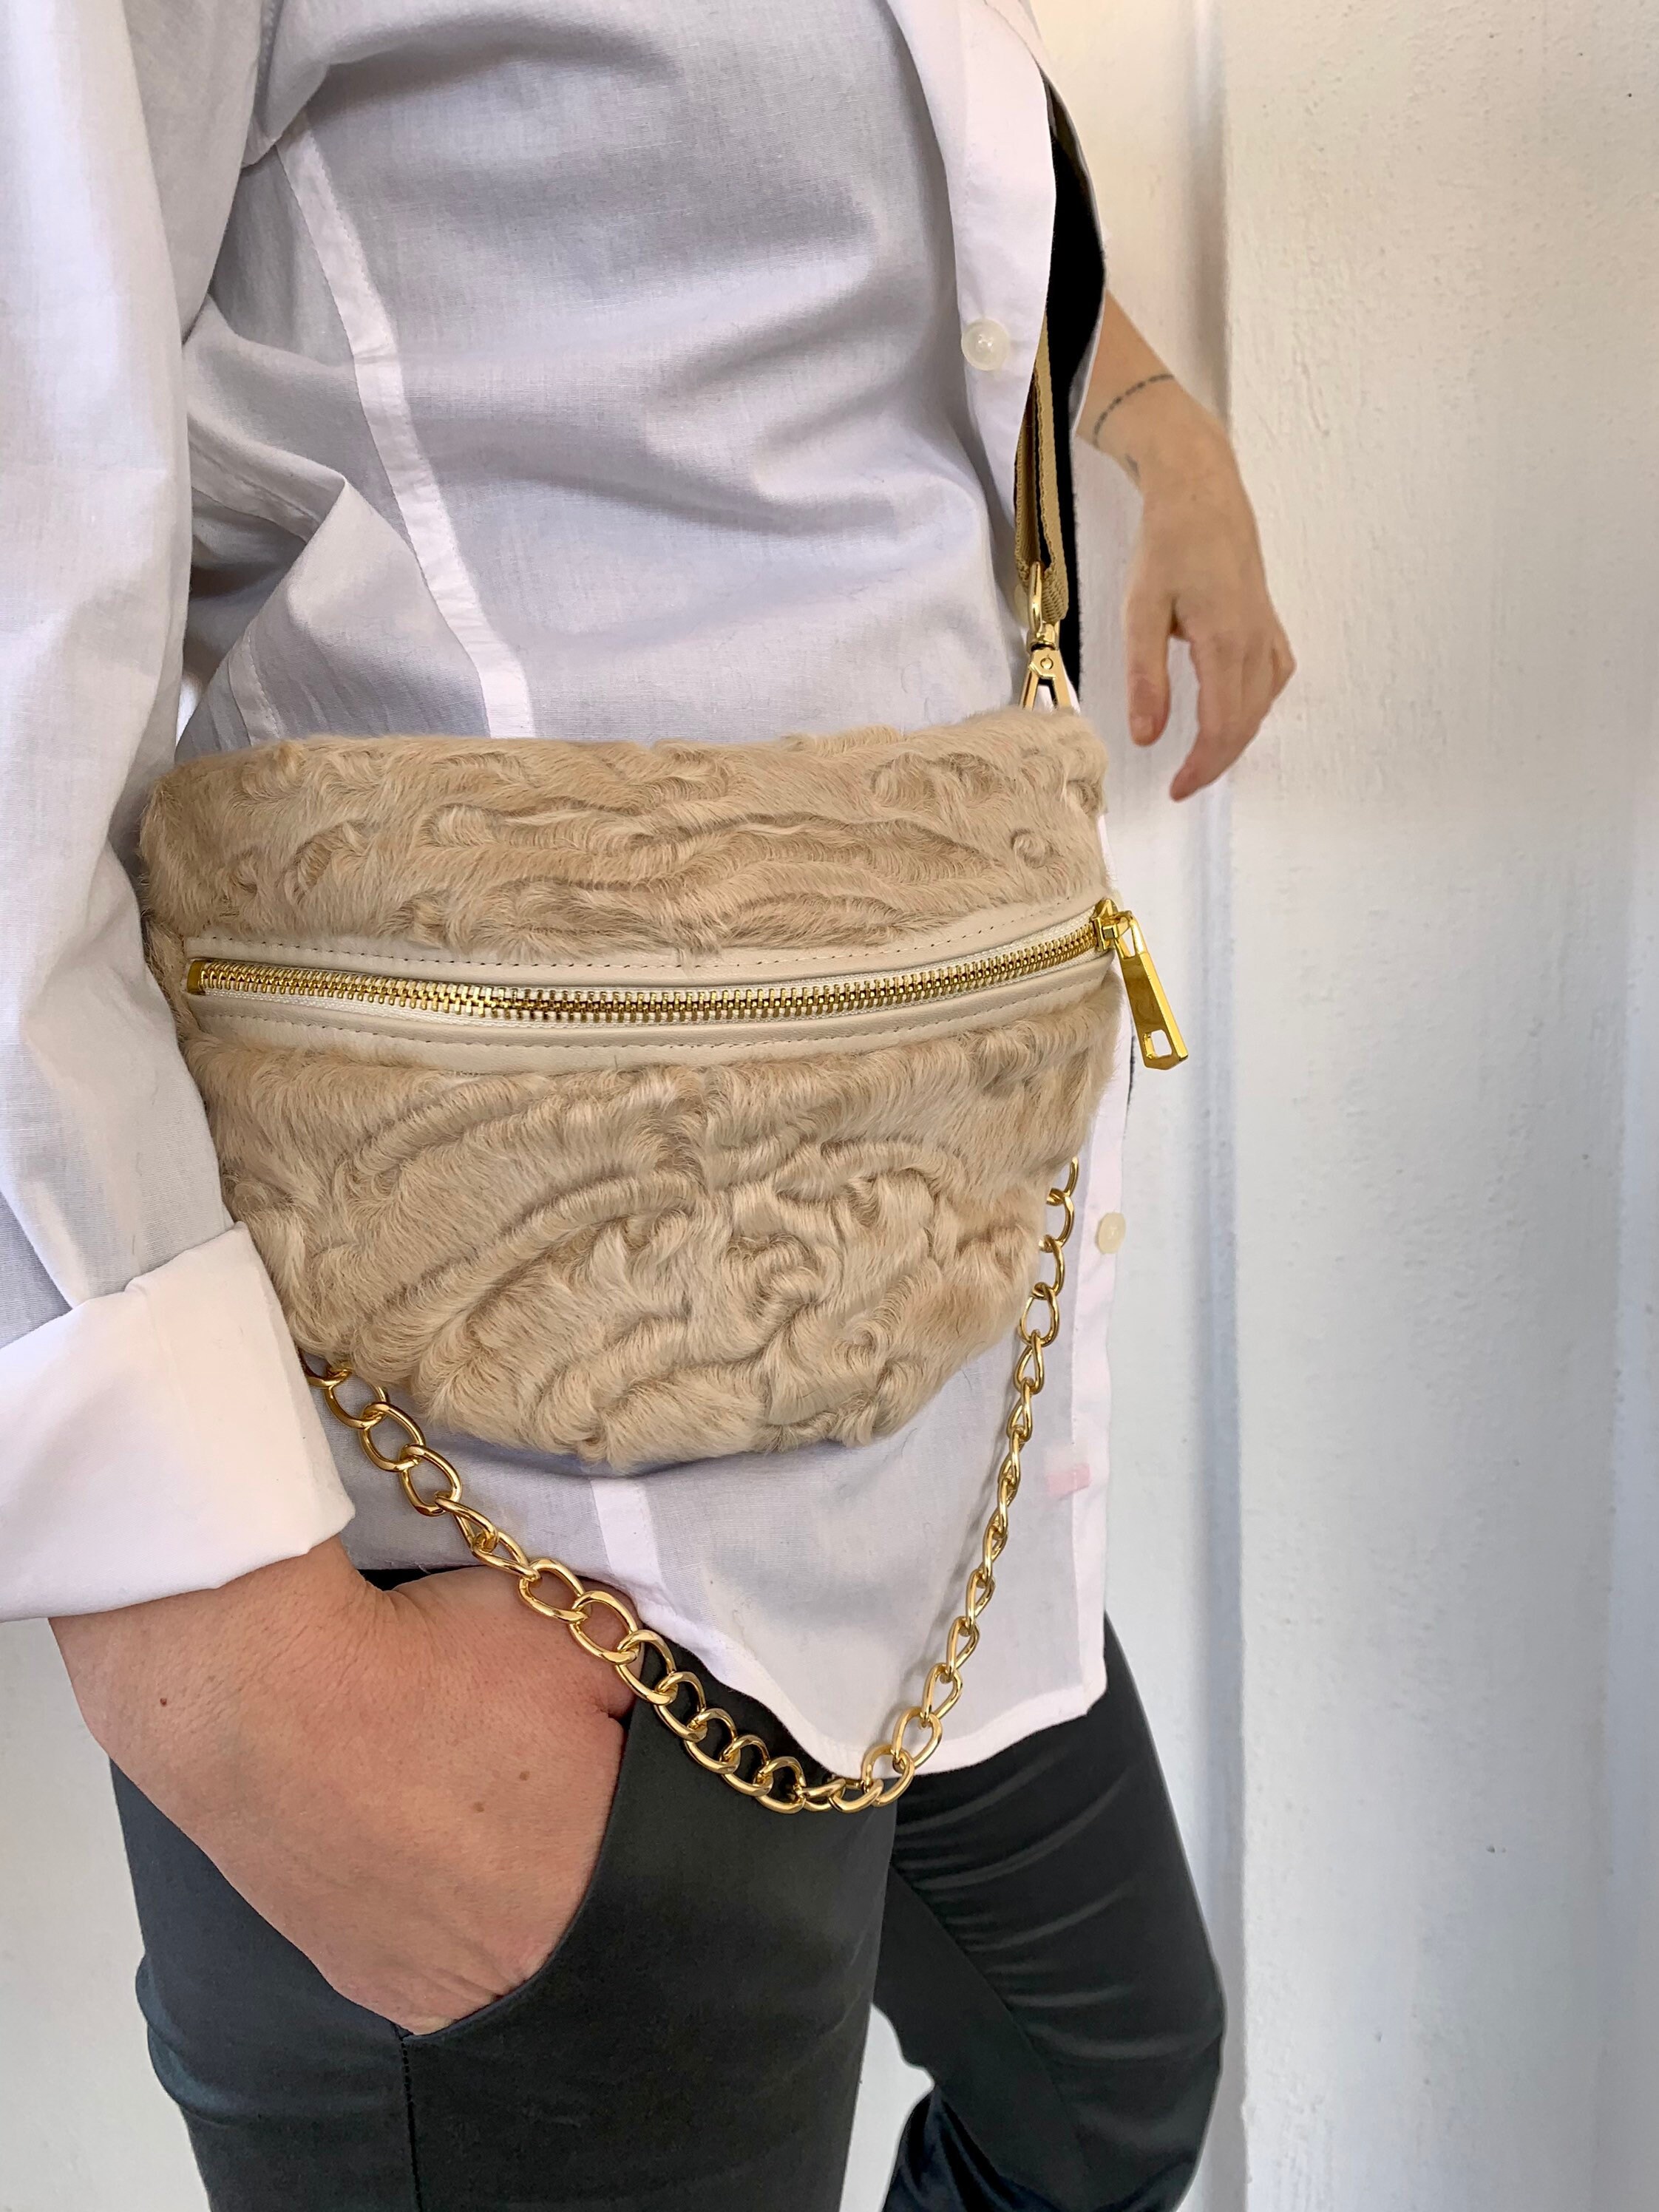 Fanny Packs From Gucci, Louis Vuitton and Chanel